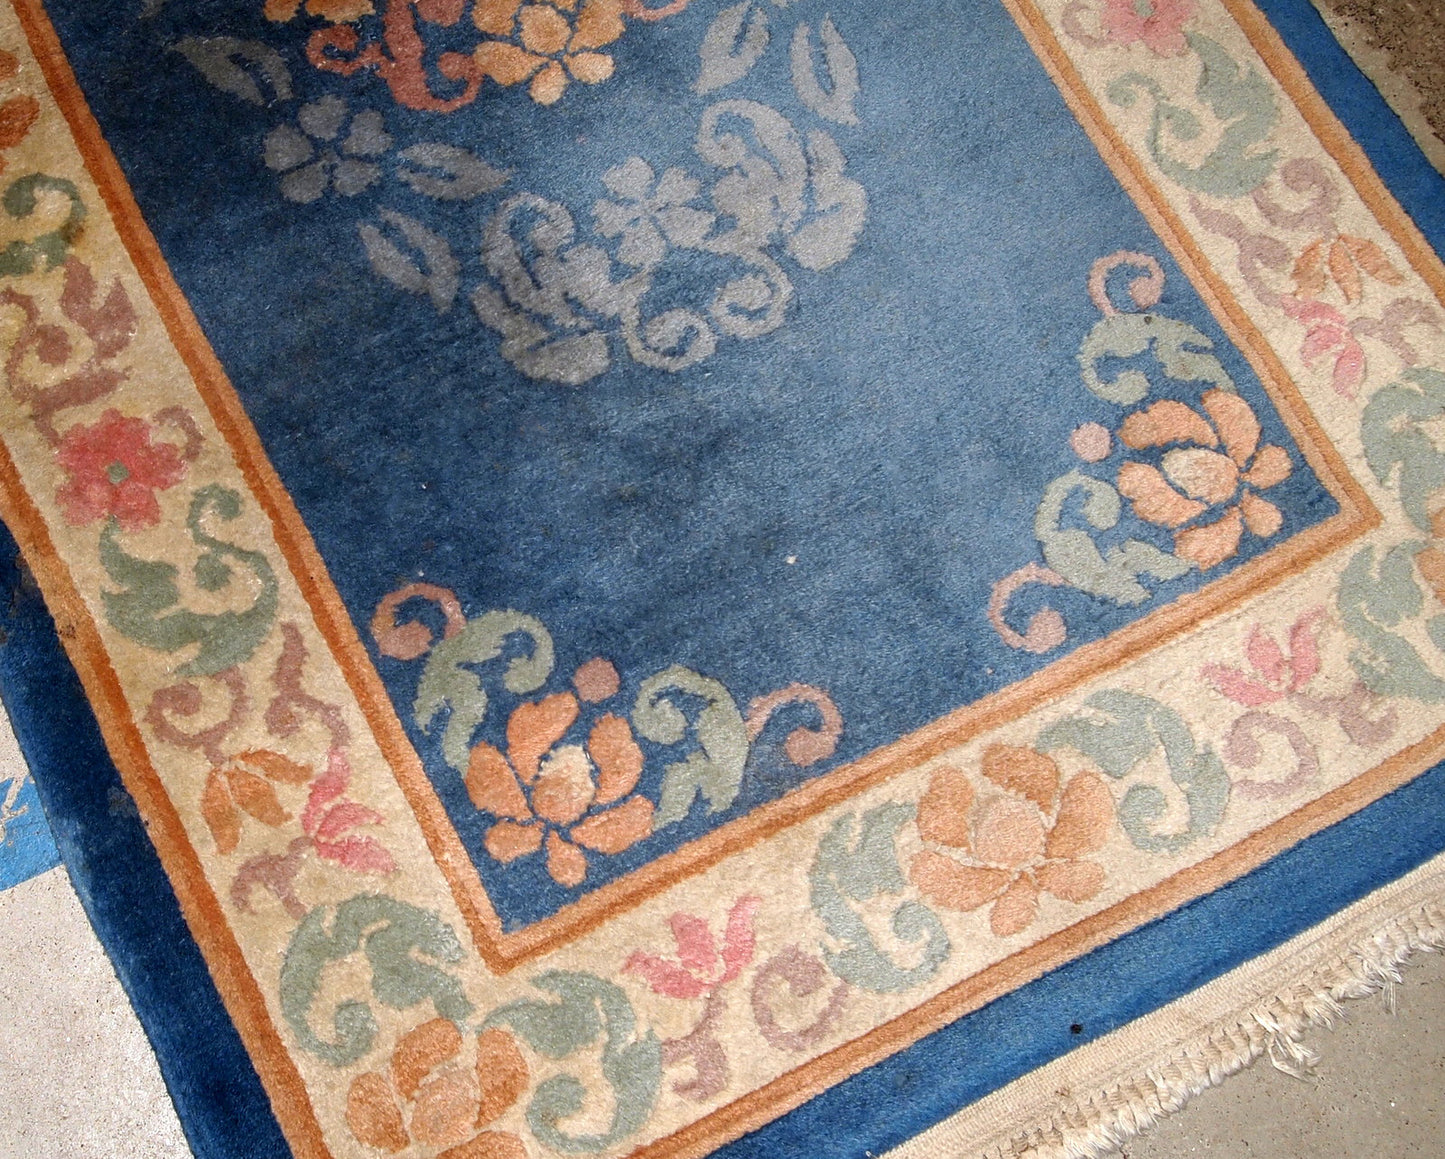 Antique handmade Art Deco Chinese rug in blue shade and traditional floral design. The rug is from 1960s in original good condition.